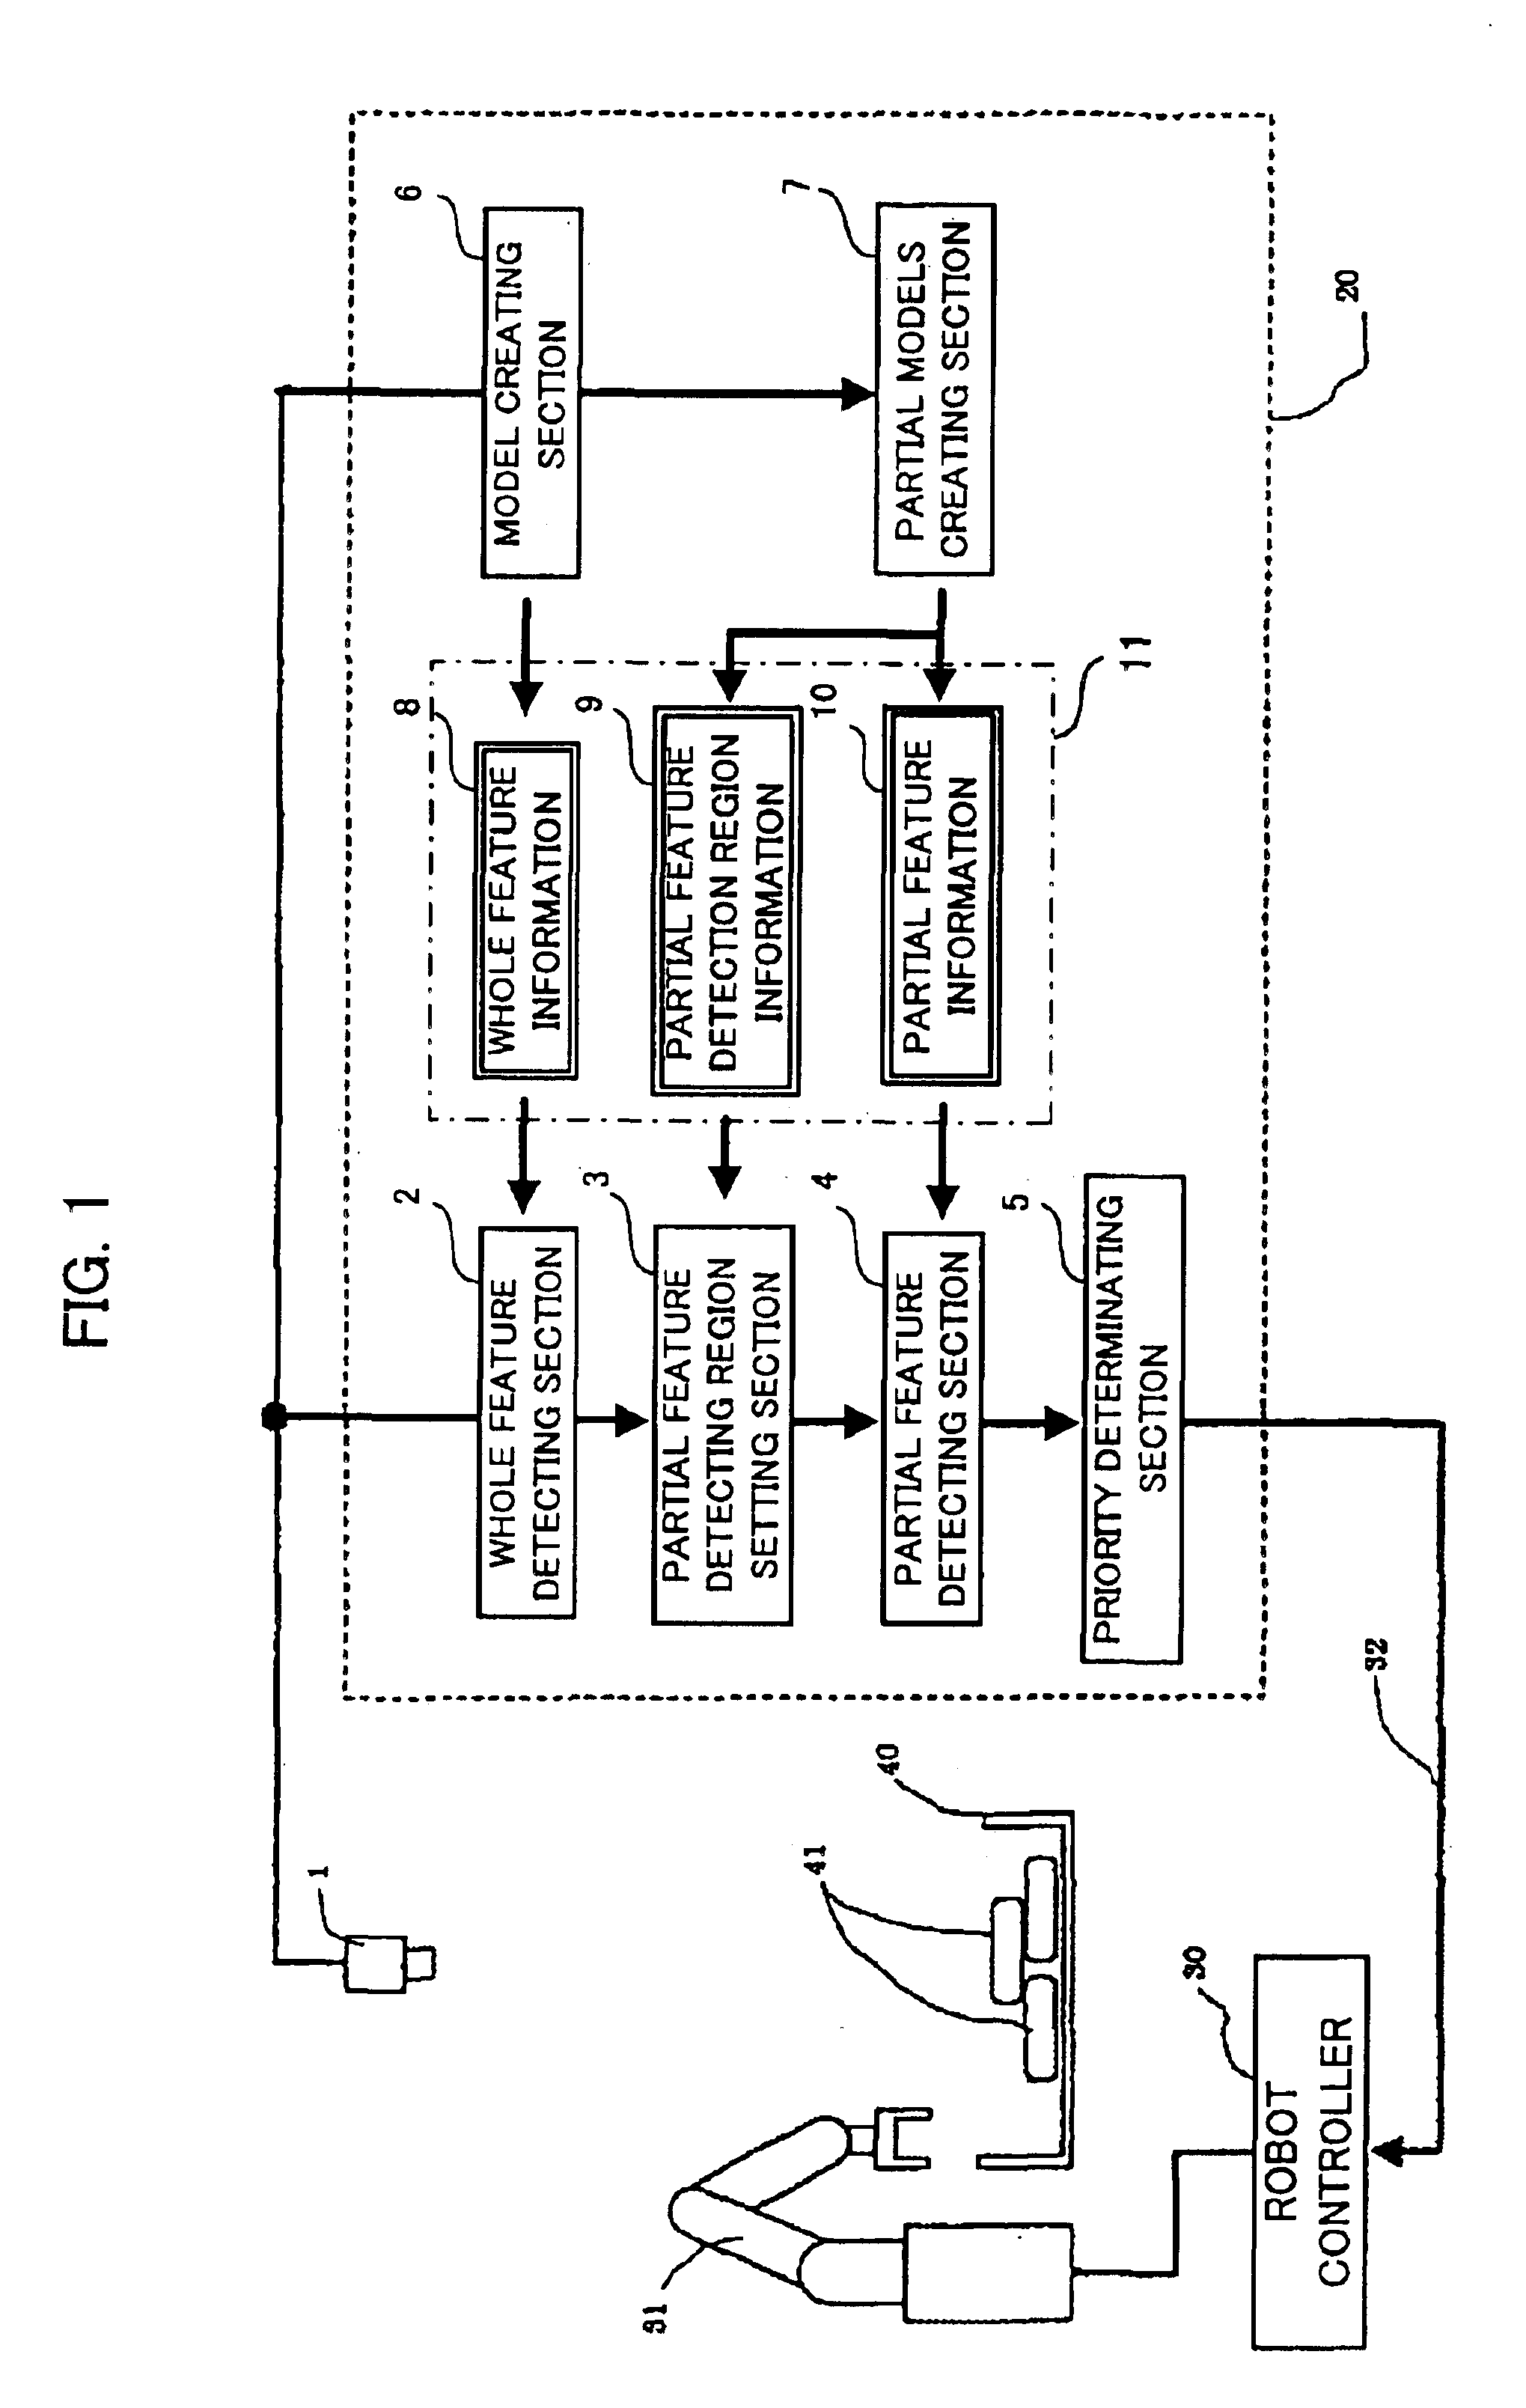 Object taking out apparatus